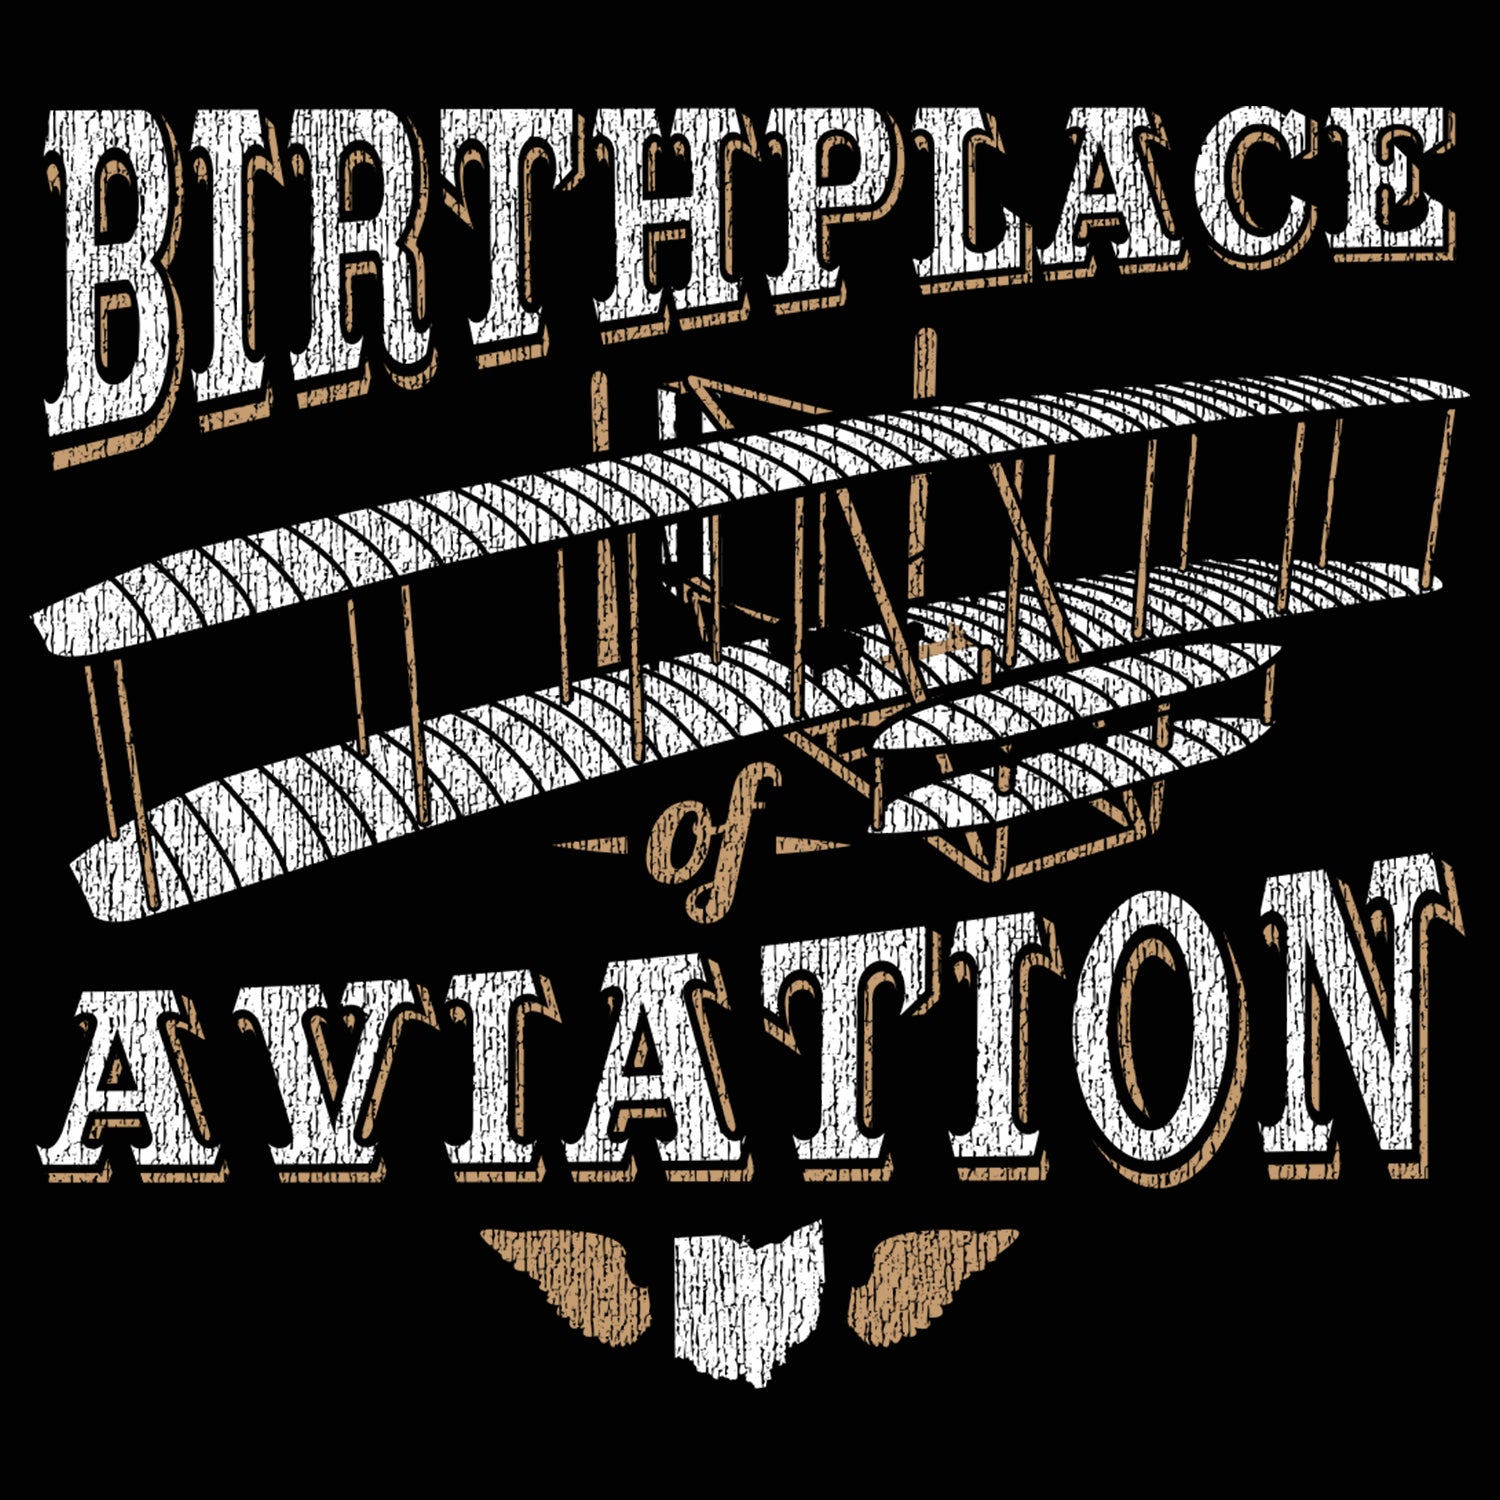 Birthplace of Aviation